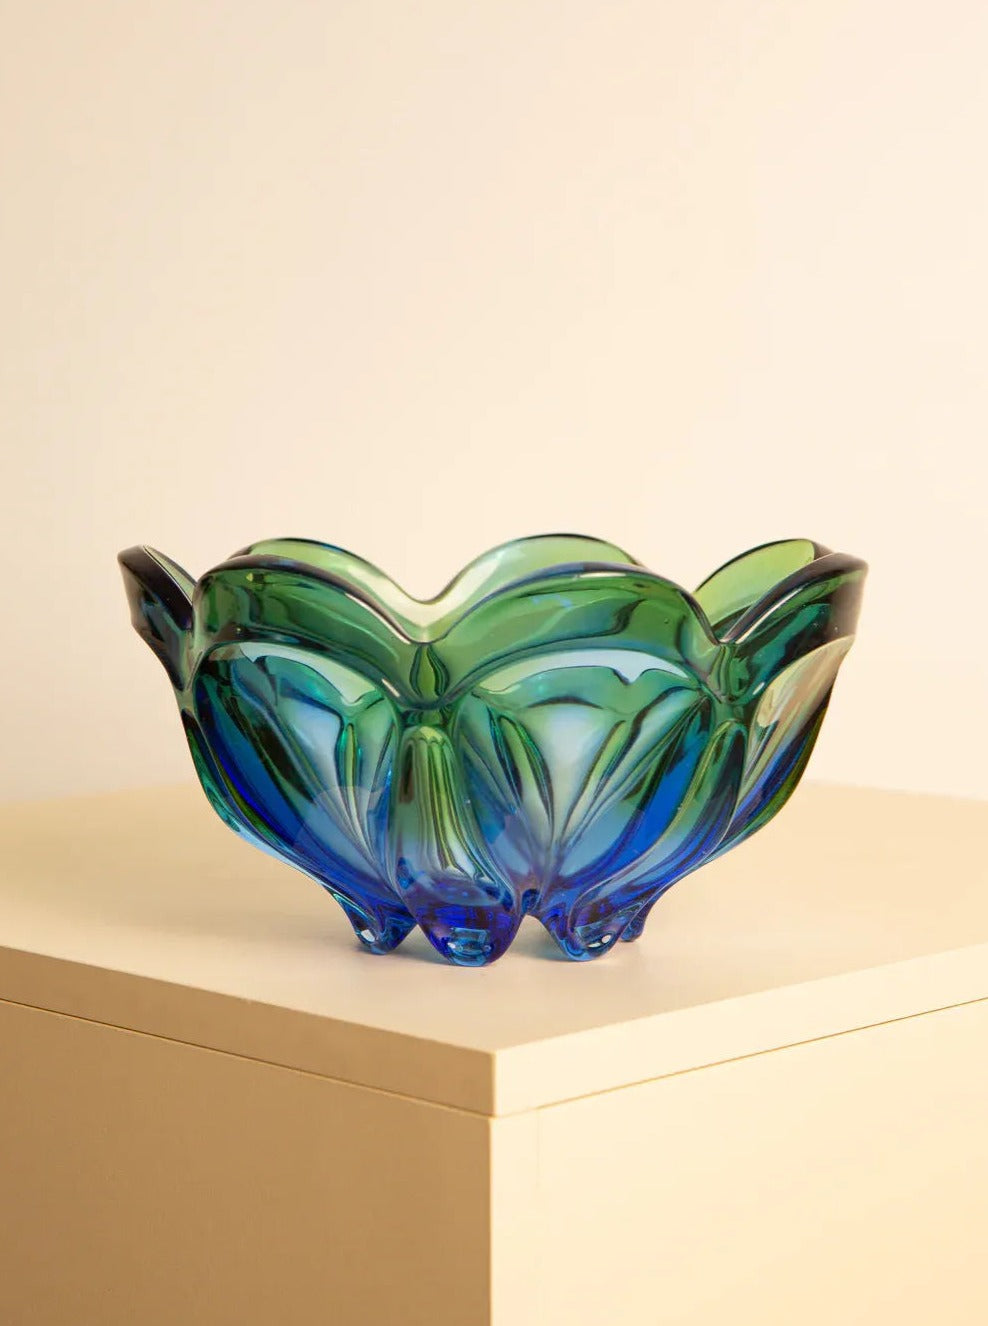 A Large vide-poches "Flower" in 60's Murano glass by Treaptyque with a wavy, scalloped edge in shades of blue and green sits on a light-colored wooden surface. Reminiscent of 1960s retro design, the bowl’s multiple folds and curves give it a textured and artistic appearance. The background is plain and softly lit.